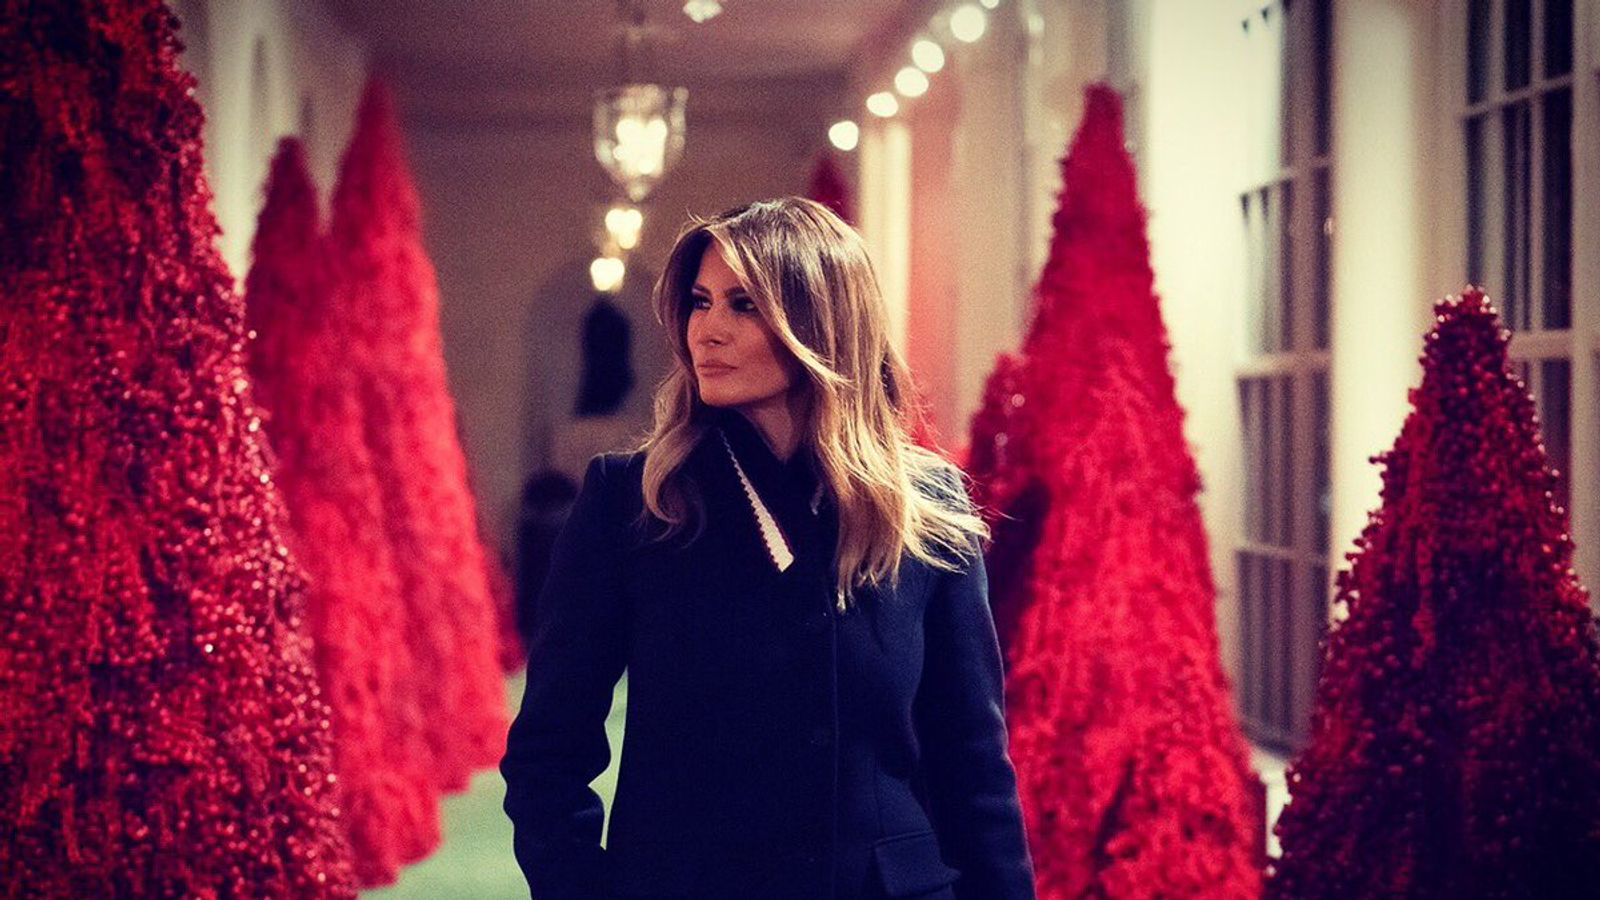 Melania Trump defends 'fantastic' red Christmas trees at White House